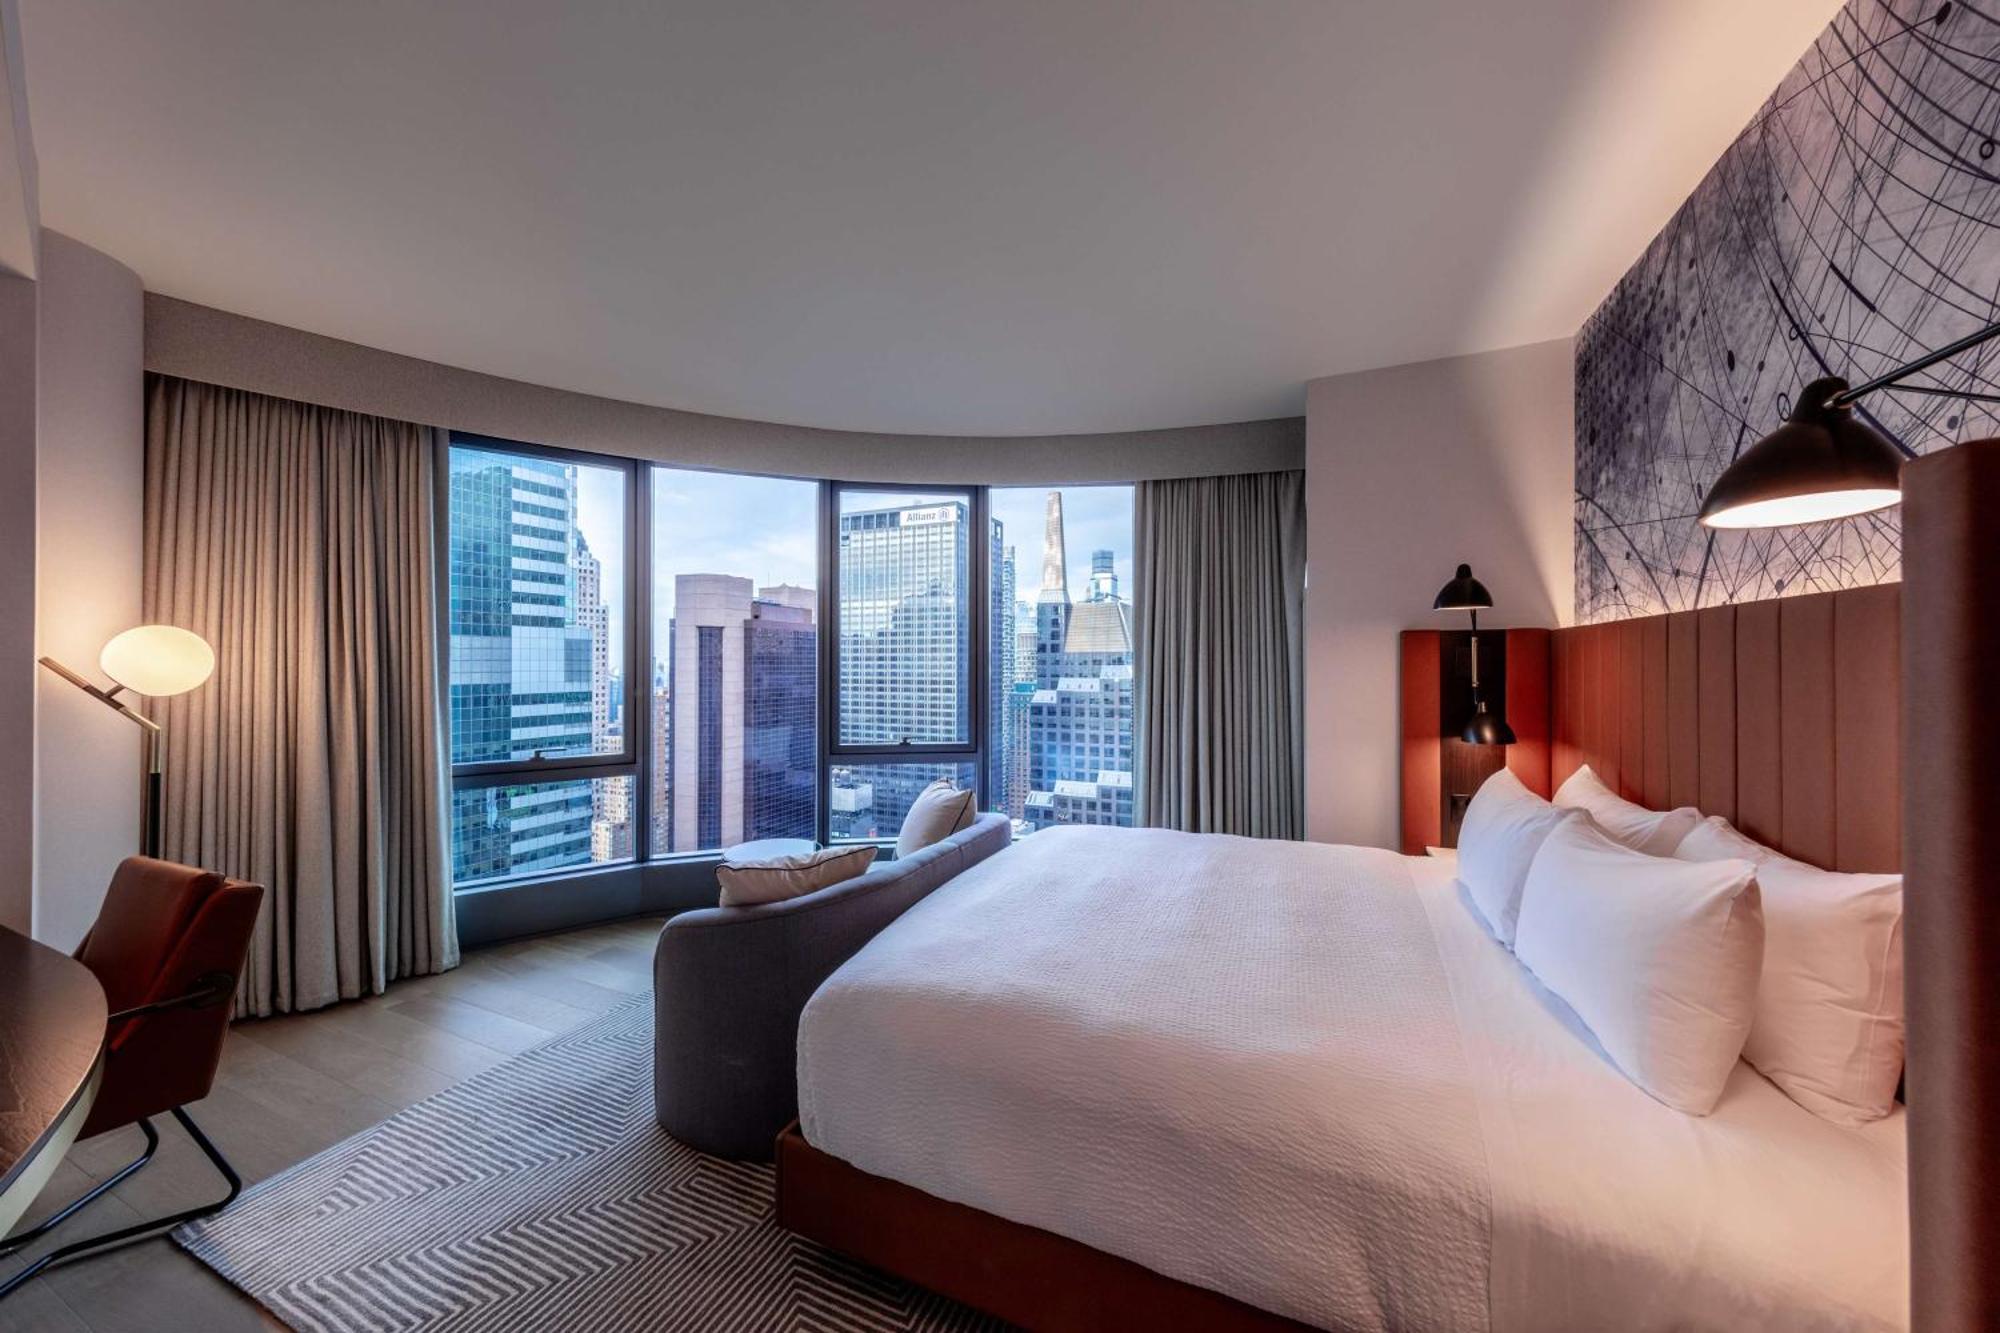 Tempo By Hilton New York Times Square Hotel ภายนอก รูปภาพ